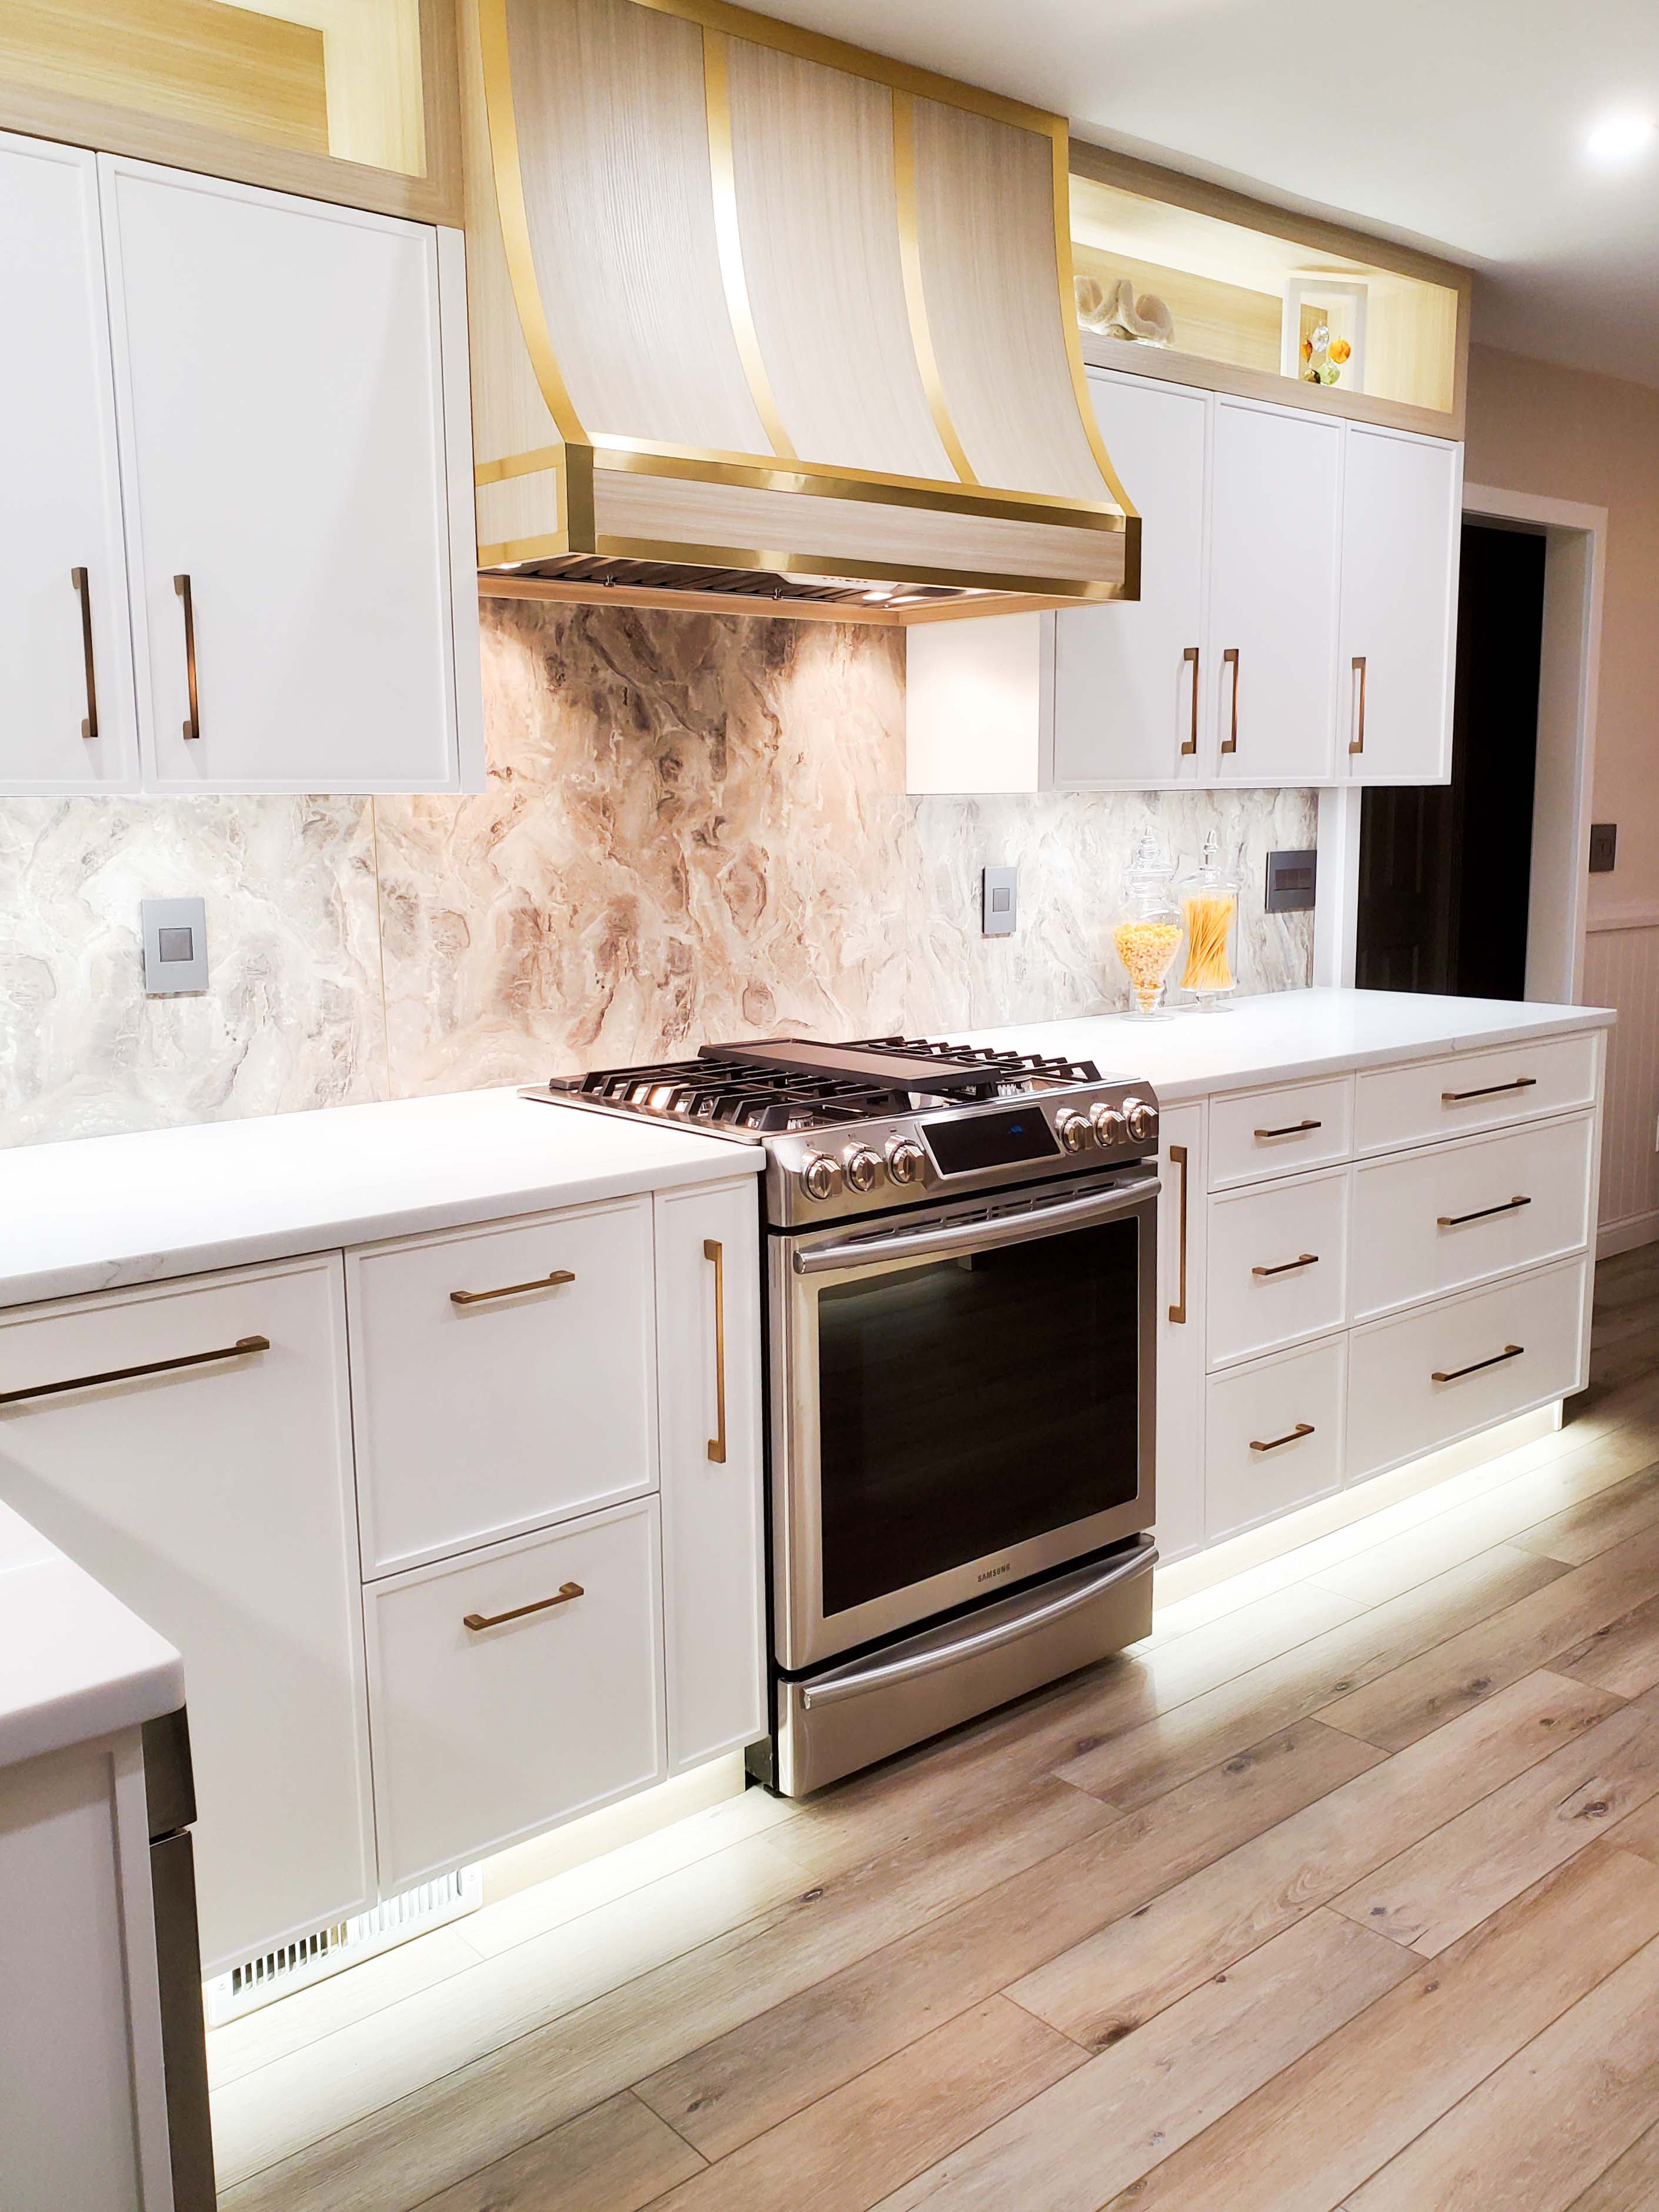 White range hood cover with golden trim